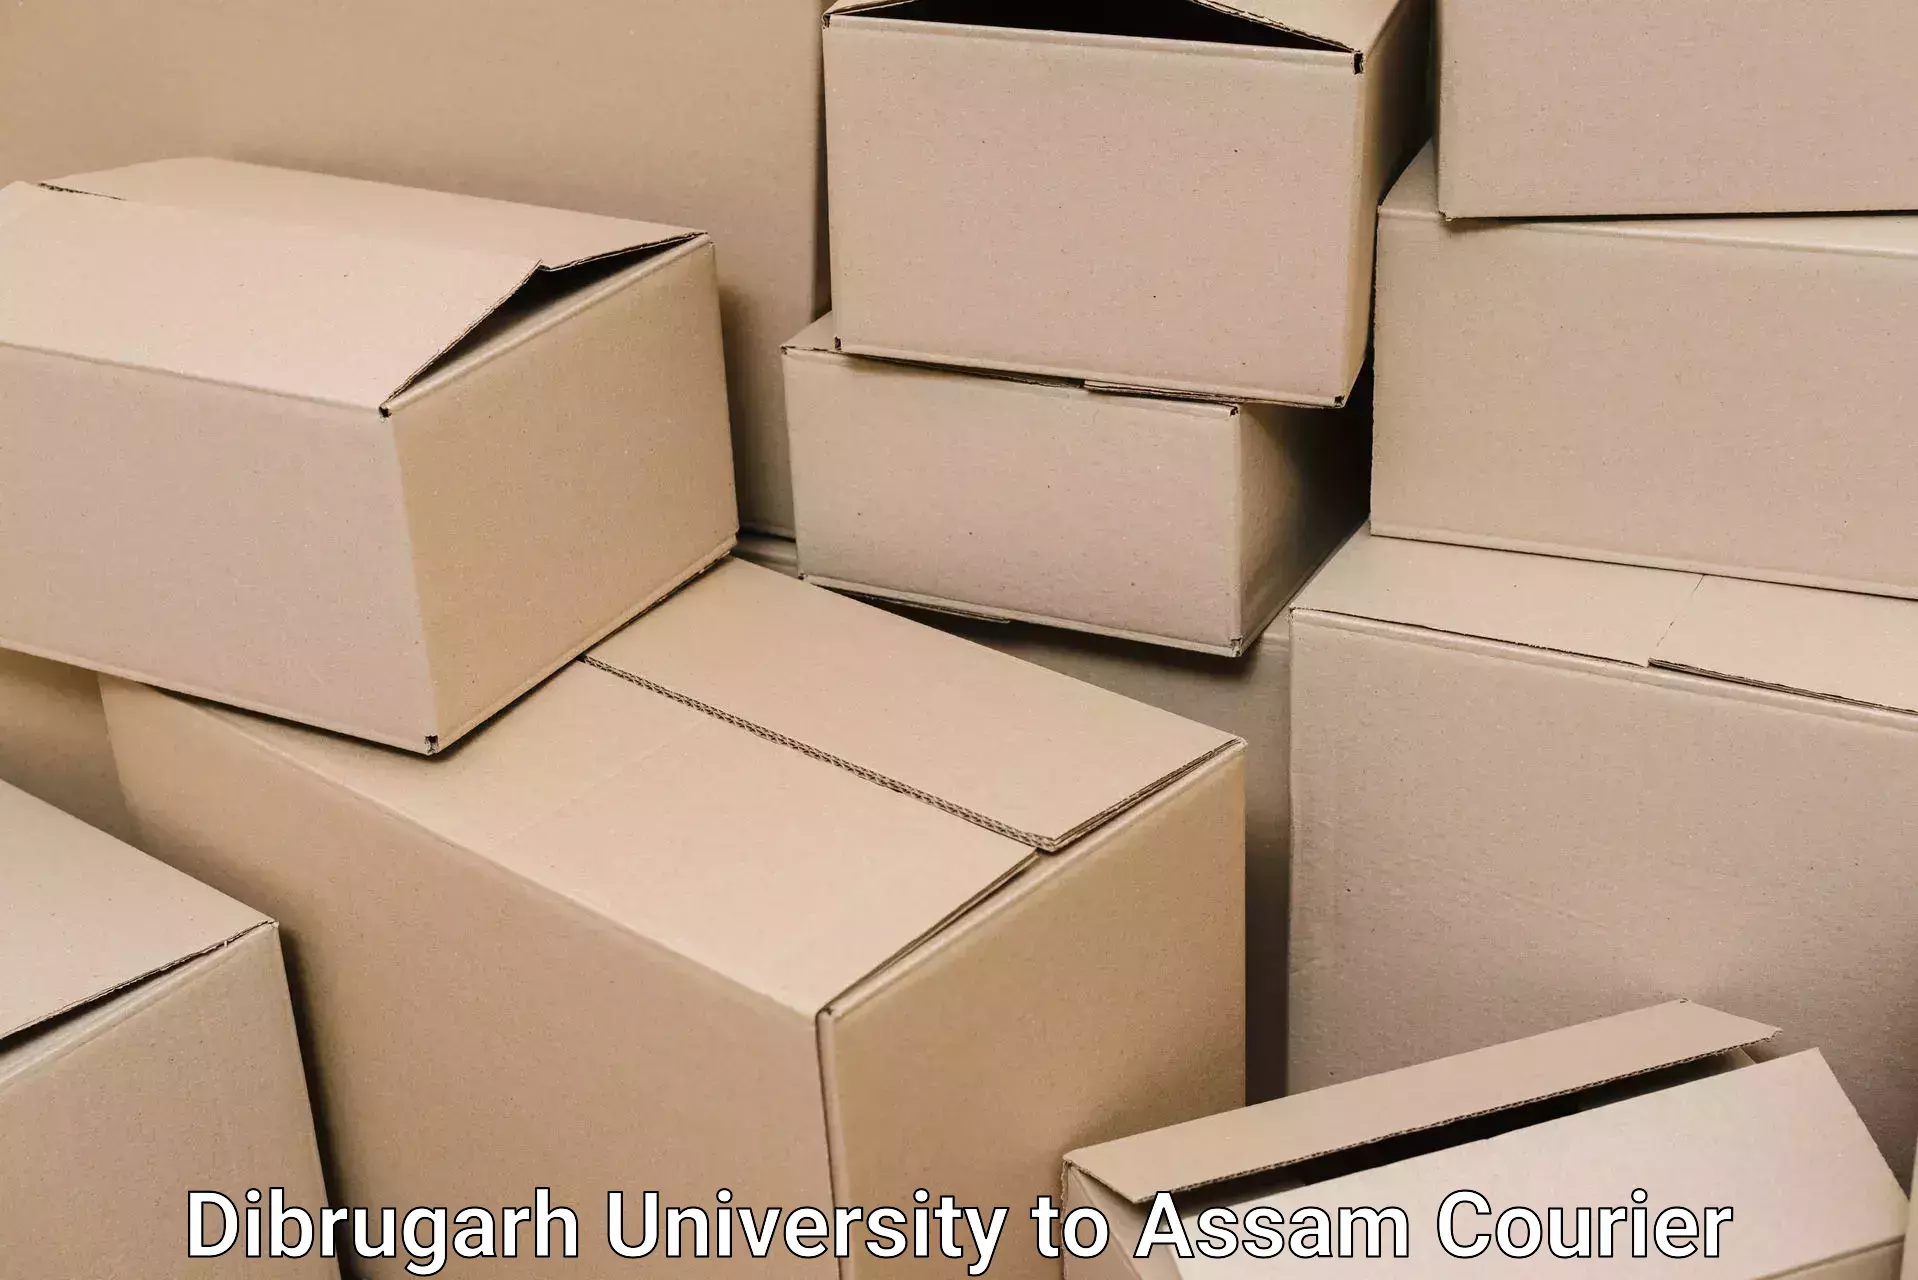 Furniture moving specialists in Dibrugarh University to Assam